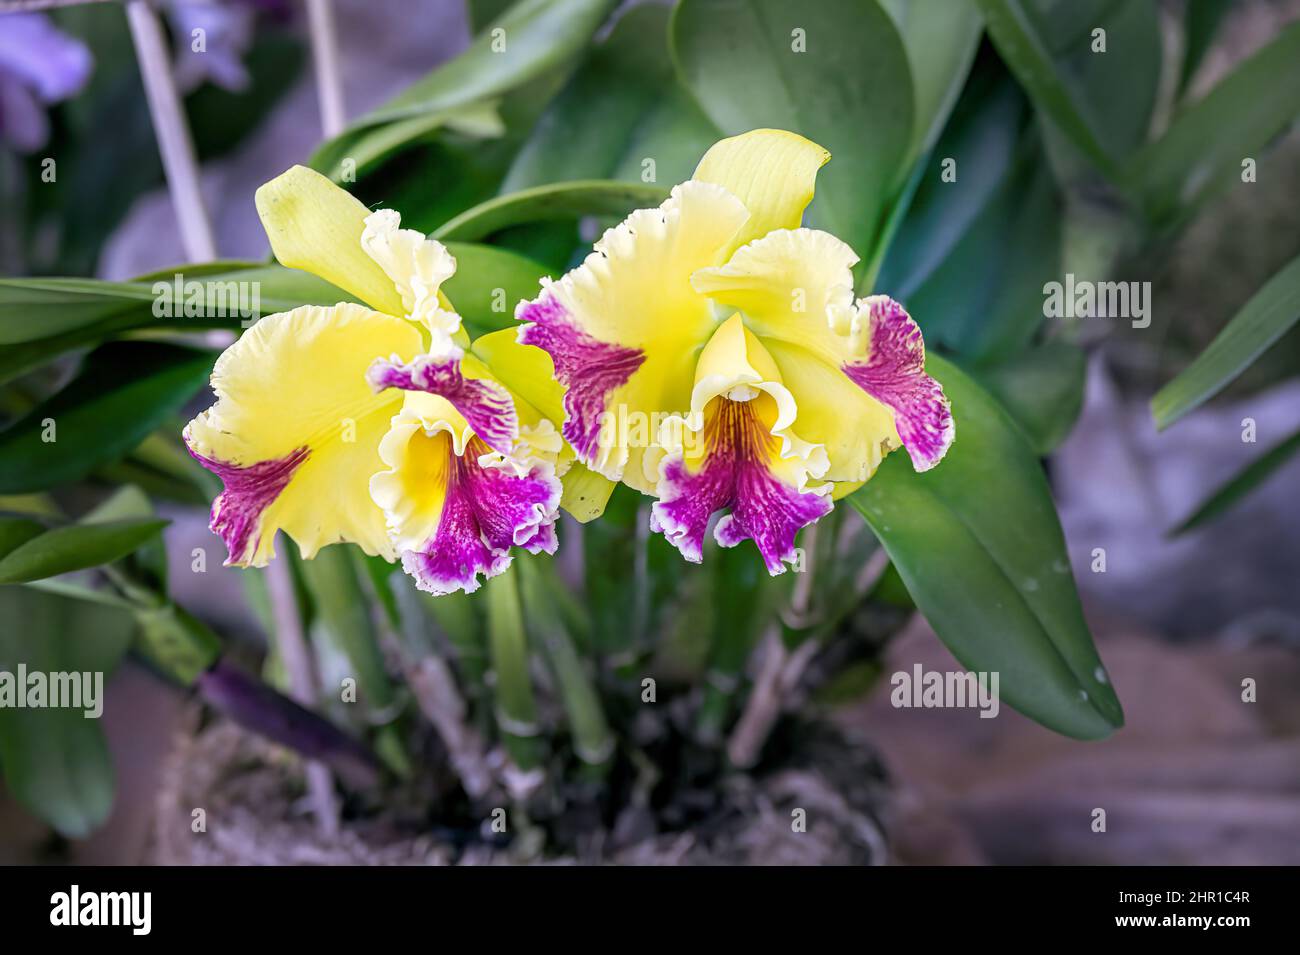 Yellow and purple flowers of the orchid Brassolaeliocattleya Hwa Yuan Grace Stock Photo